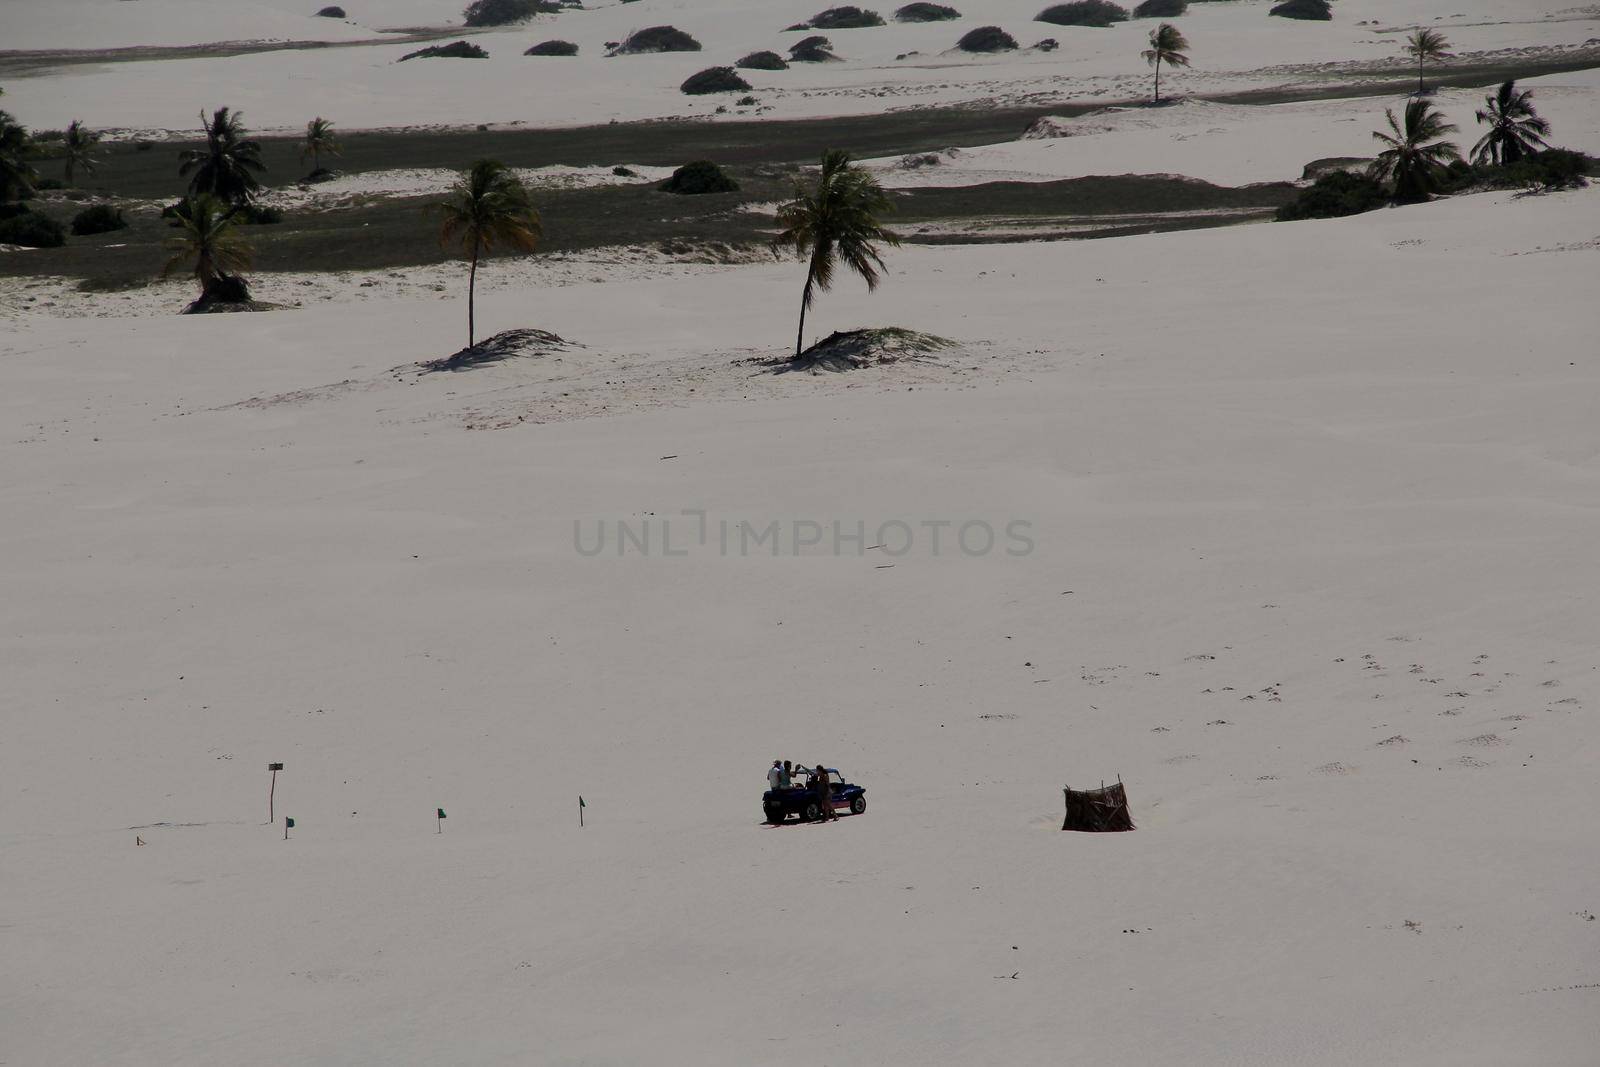 jandaira, bahia / brazil - december 24, 2013: buggy vehicle is seen passing by tourists through the sand dunes of Mangue-Seco, in the municipality of Jandaira.